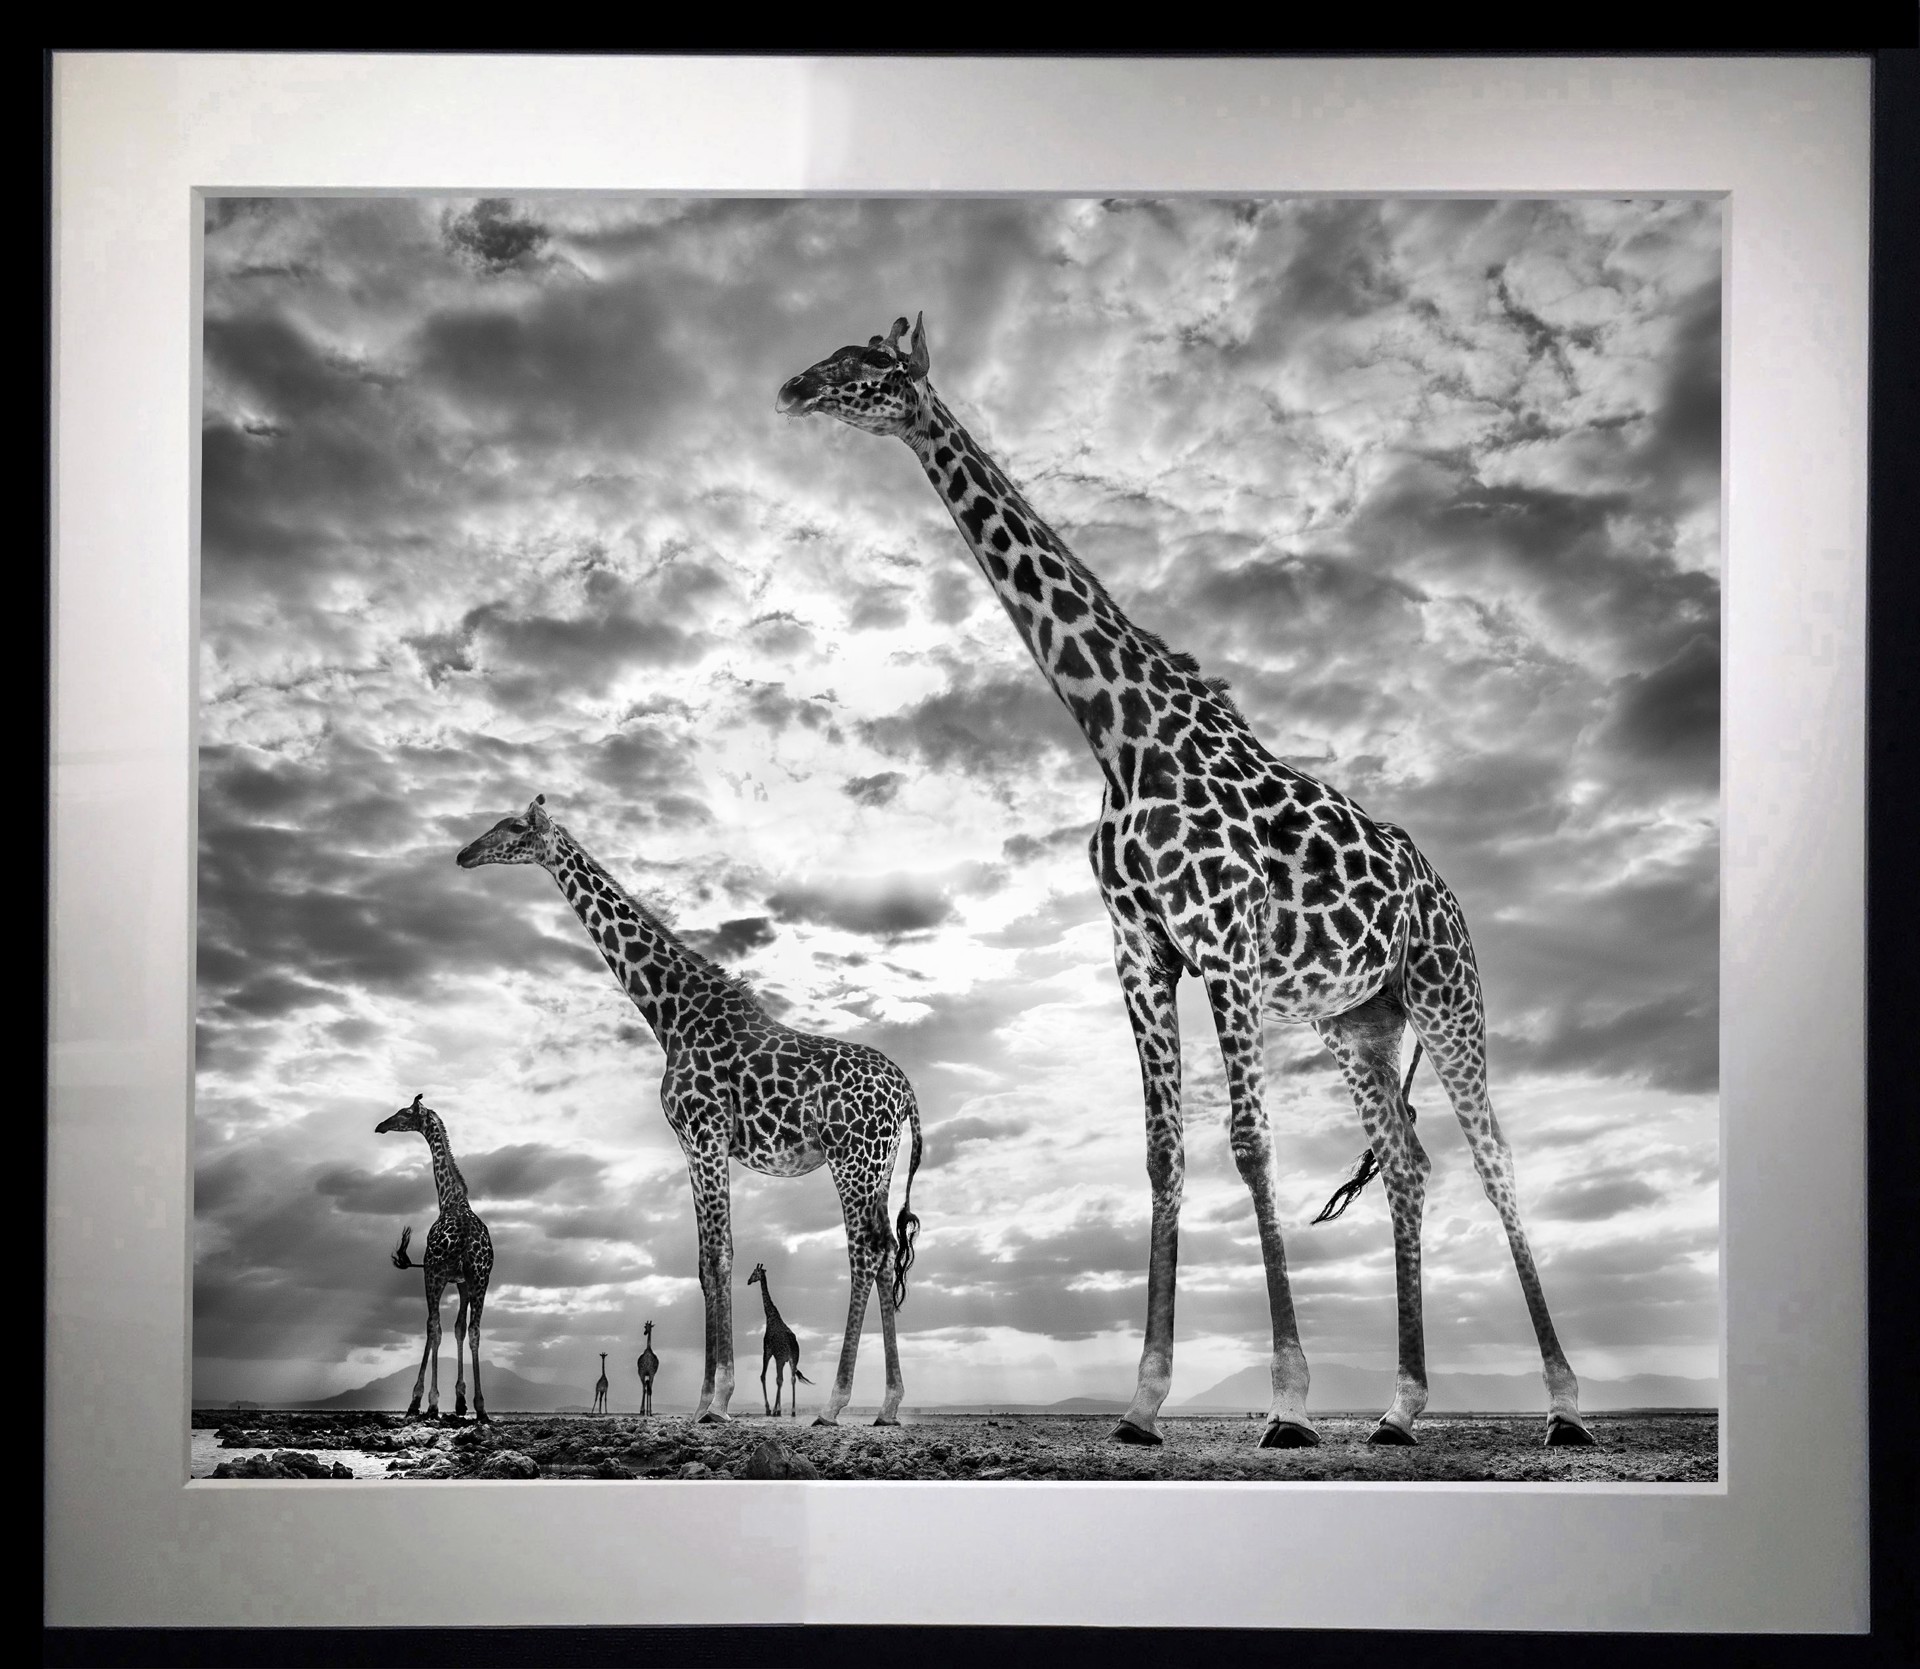 Keeping Up With The Crouches by David Yarrow